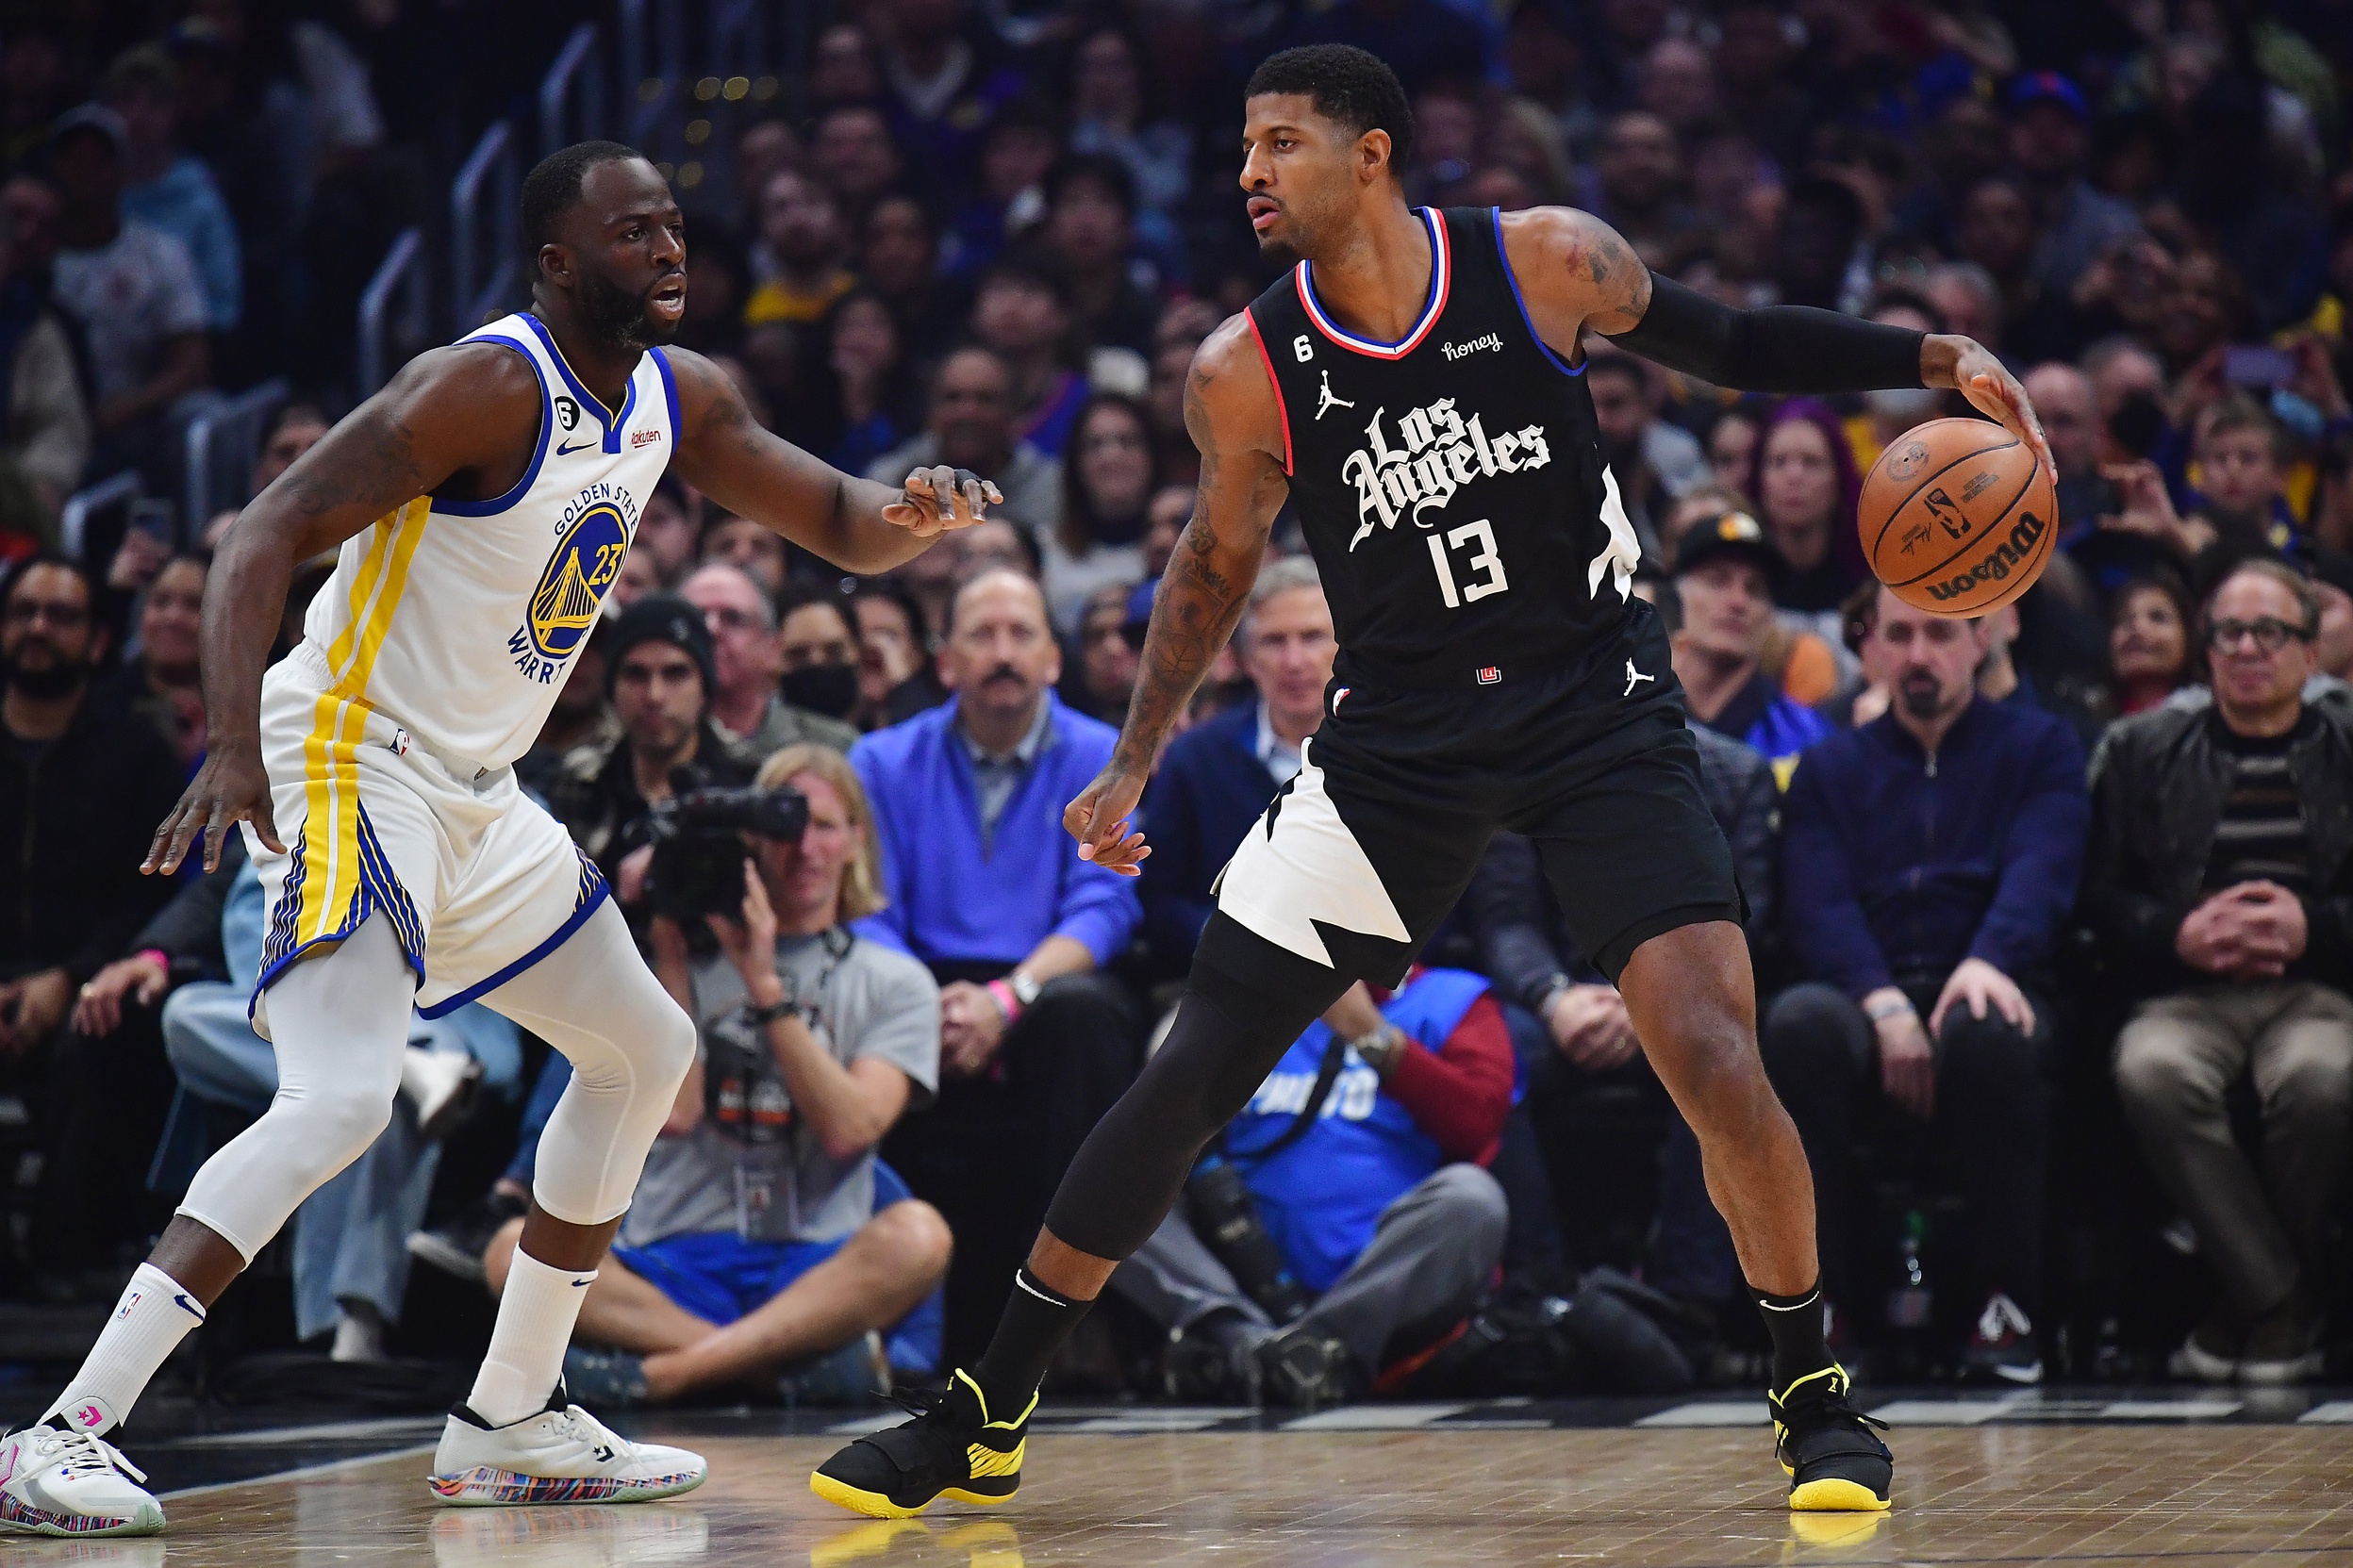 Mar 15, 2023; Los Angeles, California, USA; Los Angeles Clippers forward Paul George (13) moves the ball against Golden State Warriors forward Draymond Green (23) during the first half at Crypto.com Arena. Mandatory Credit: Gary A. Vasquez-USA TODAY Sports